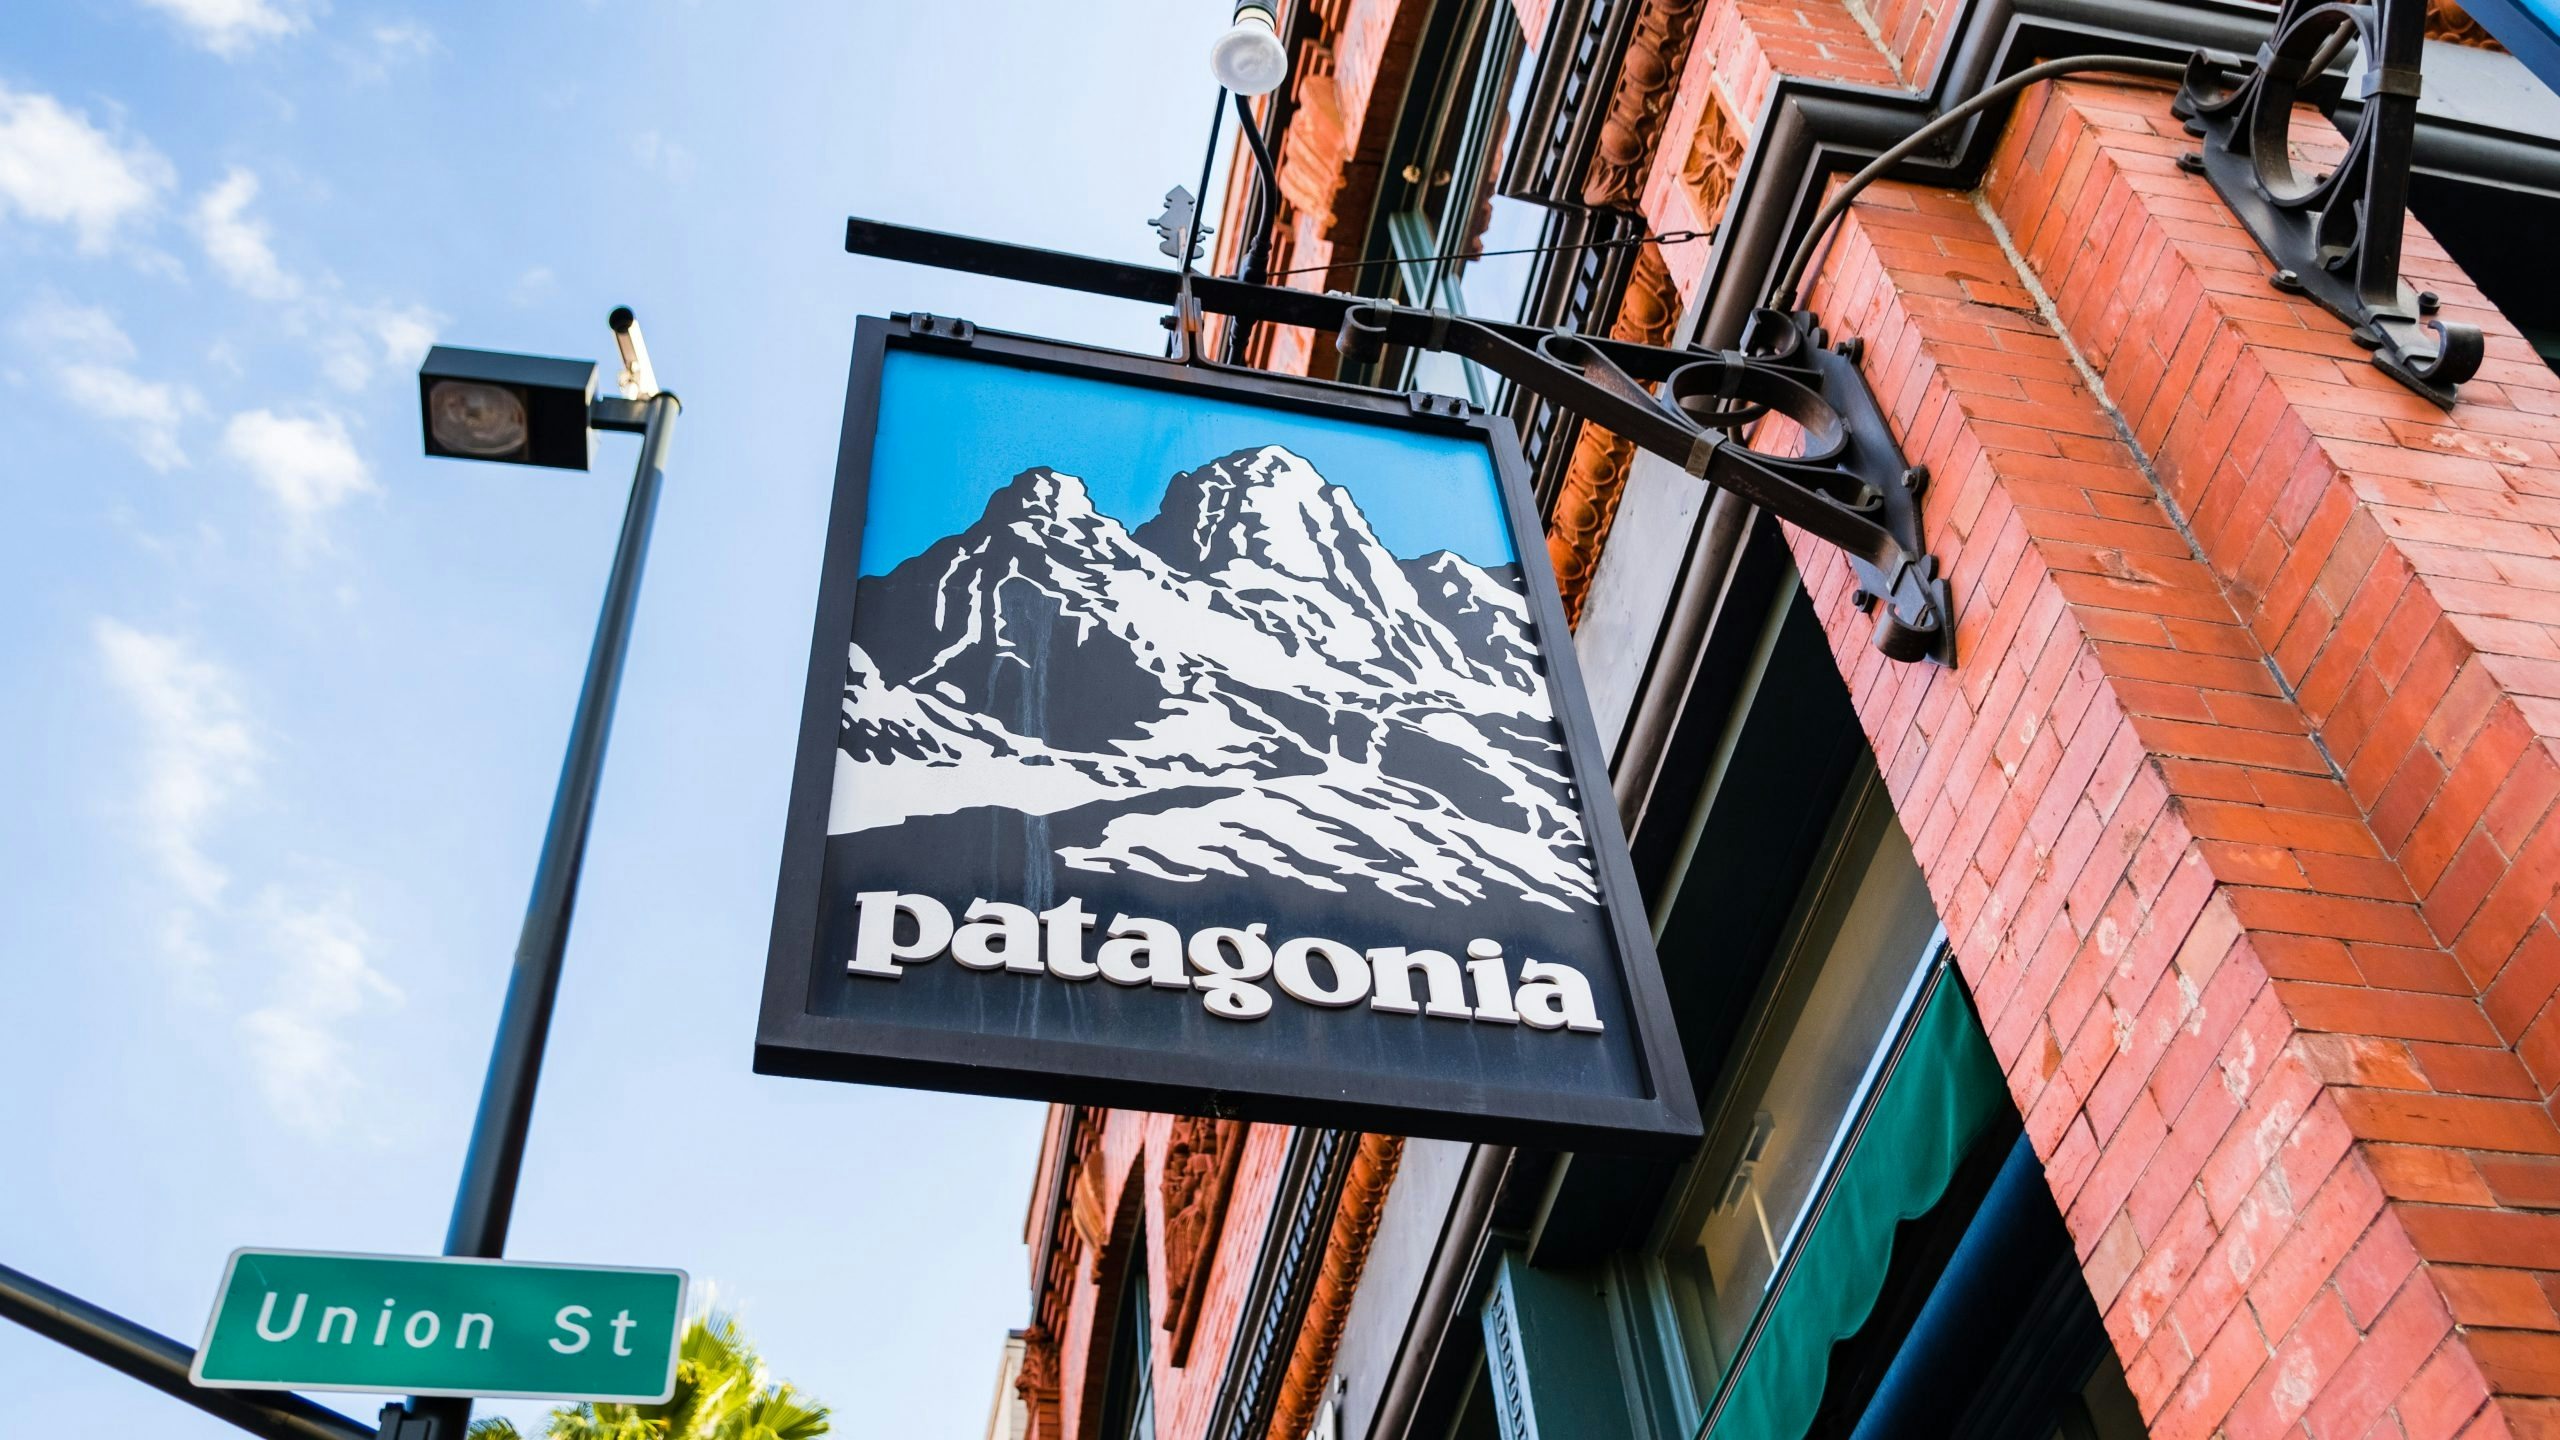 Patagonia is sticking to its anti-consumerism stance and discouraging Chinese consumers from purchasing new products during this year's 618 shopping festival. Photo: Shutterstock